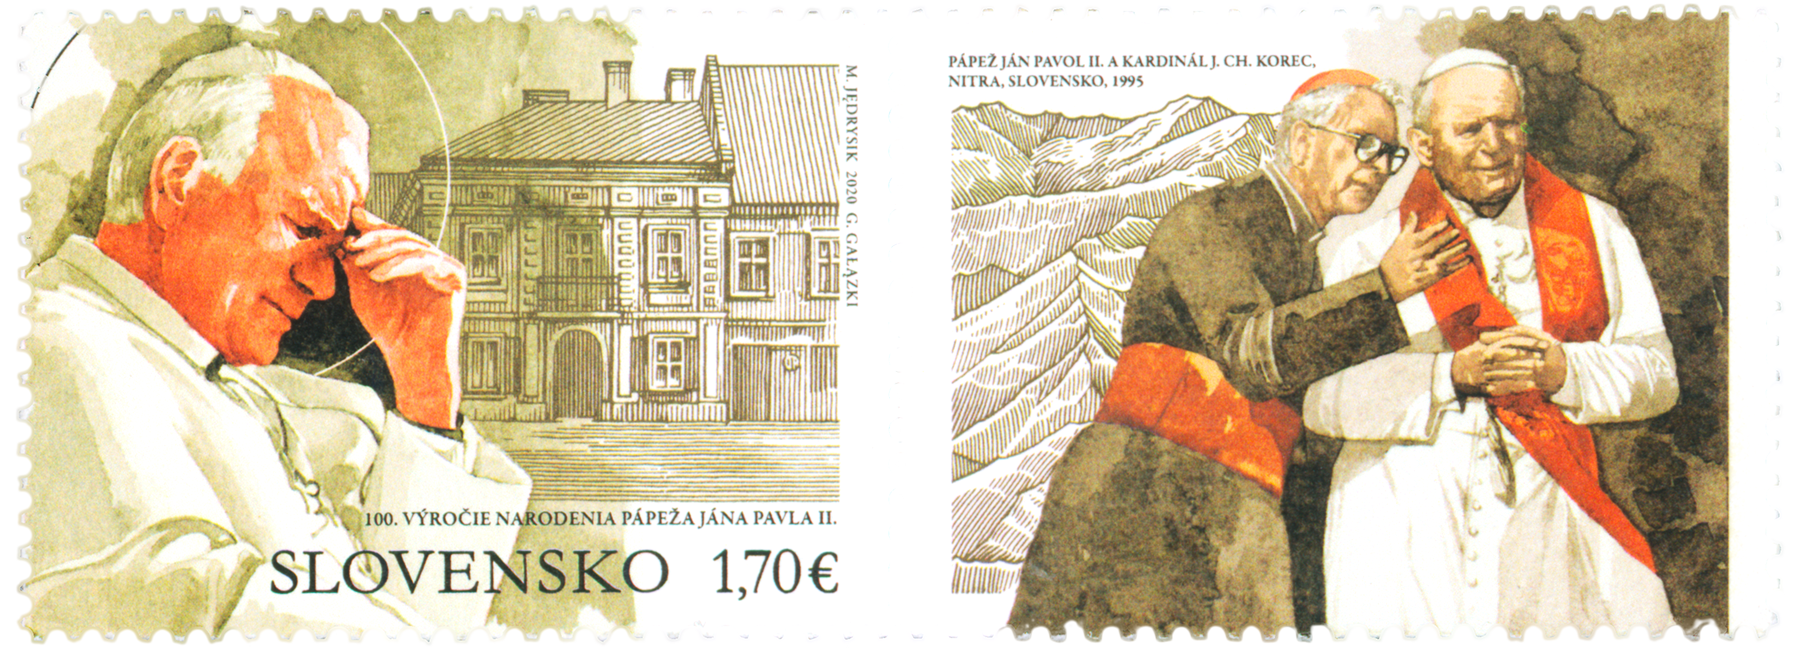 713 - A Joint Issue with Poland: The 100<sup>th</sup> Anniversary of the Birth of Pope John Paul II (1920 – 2005)